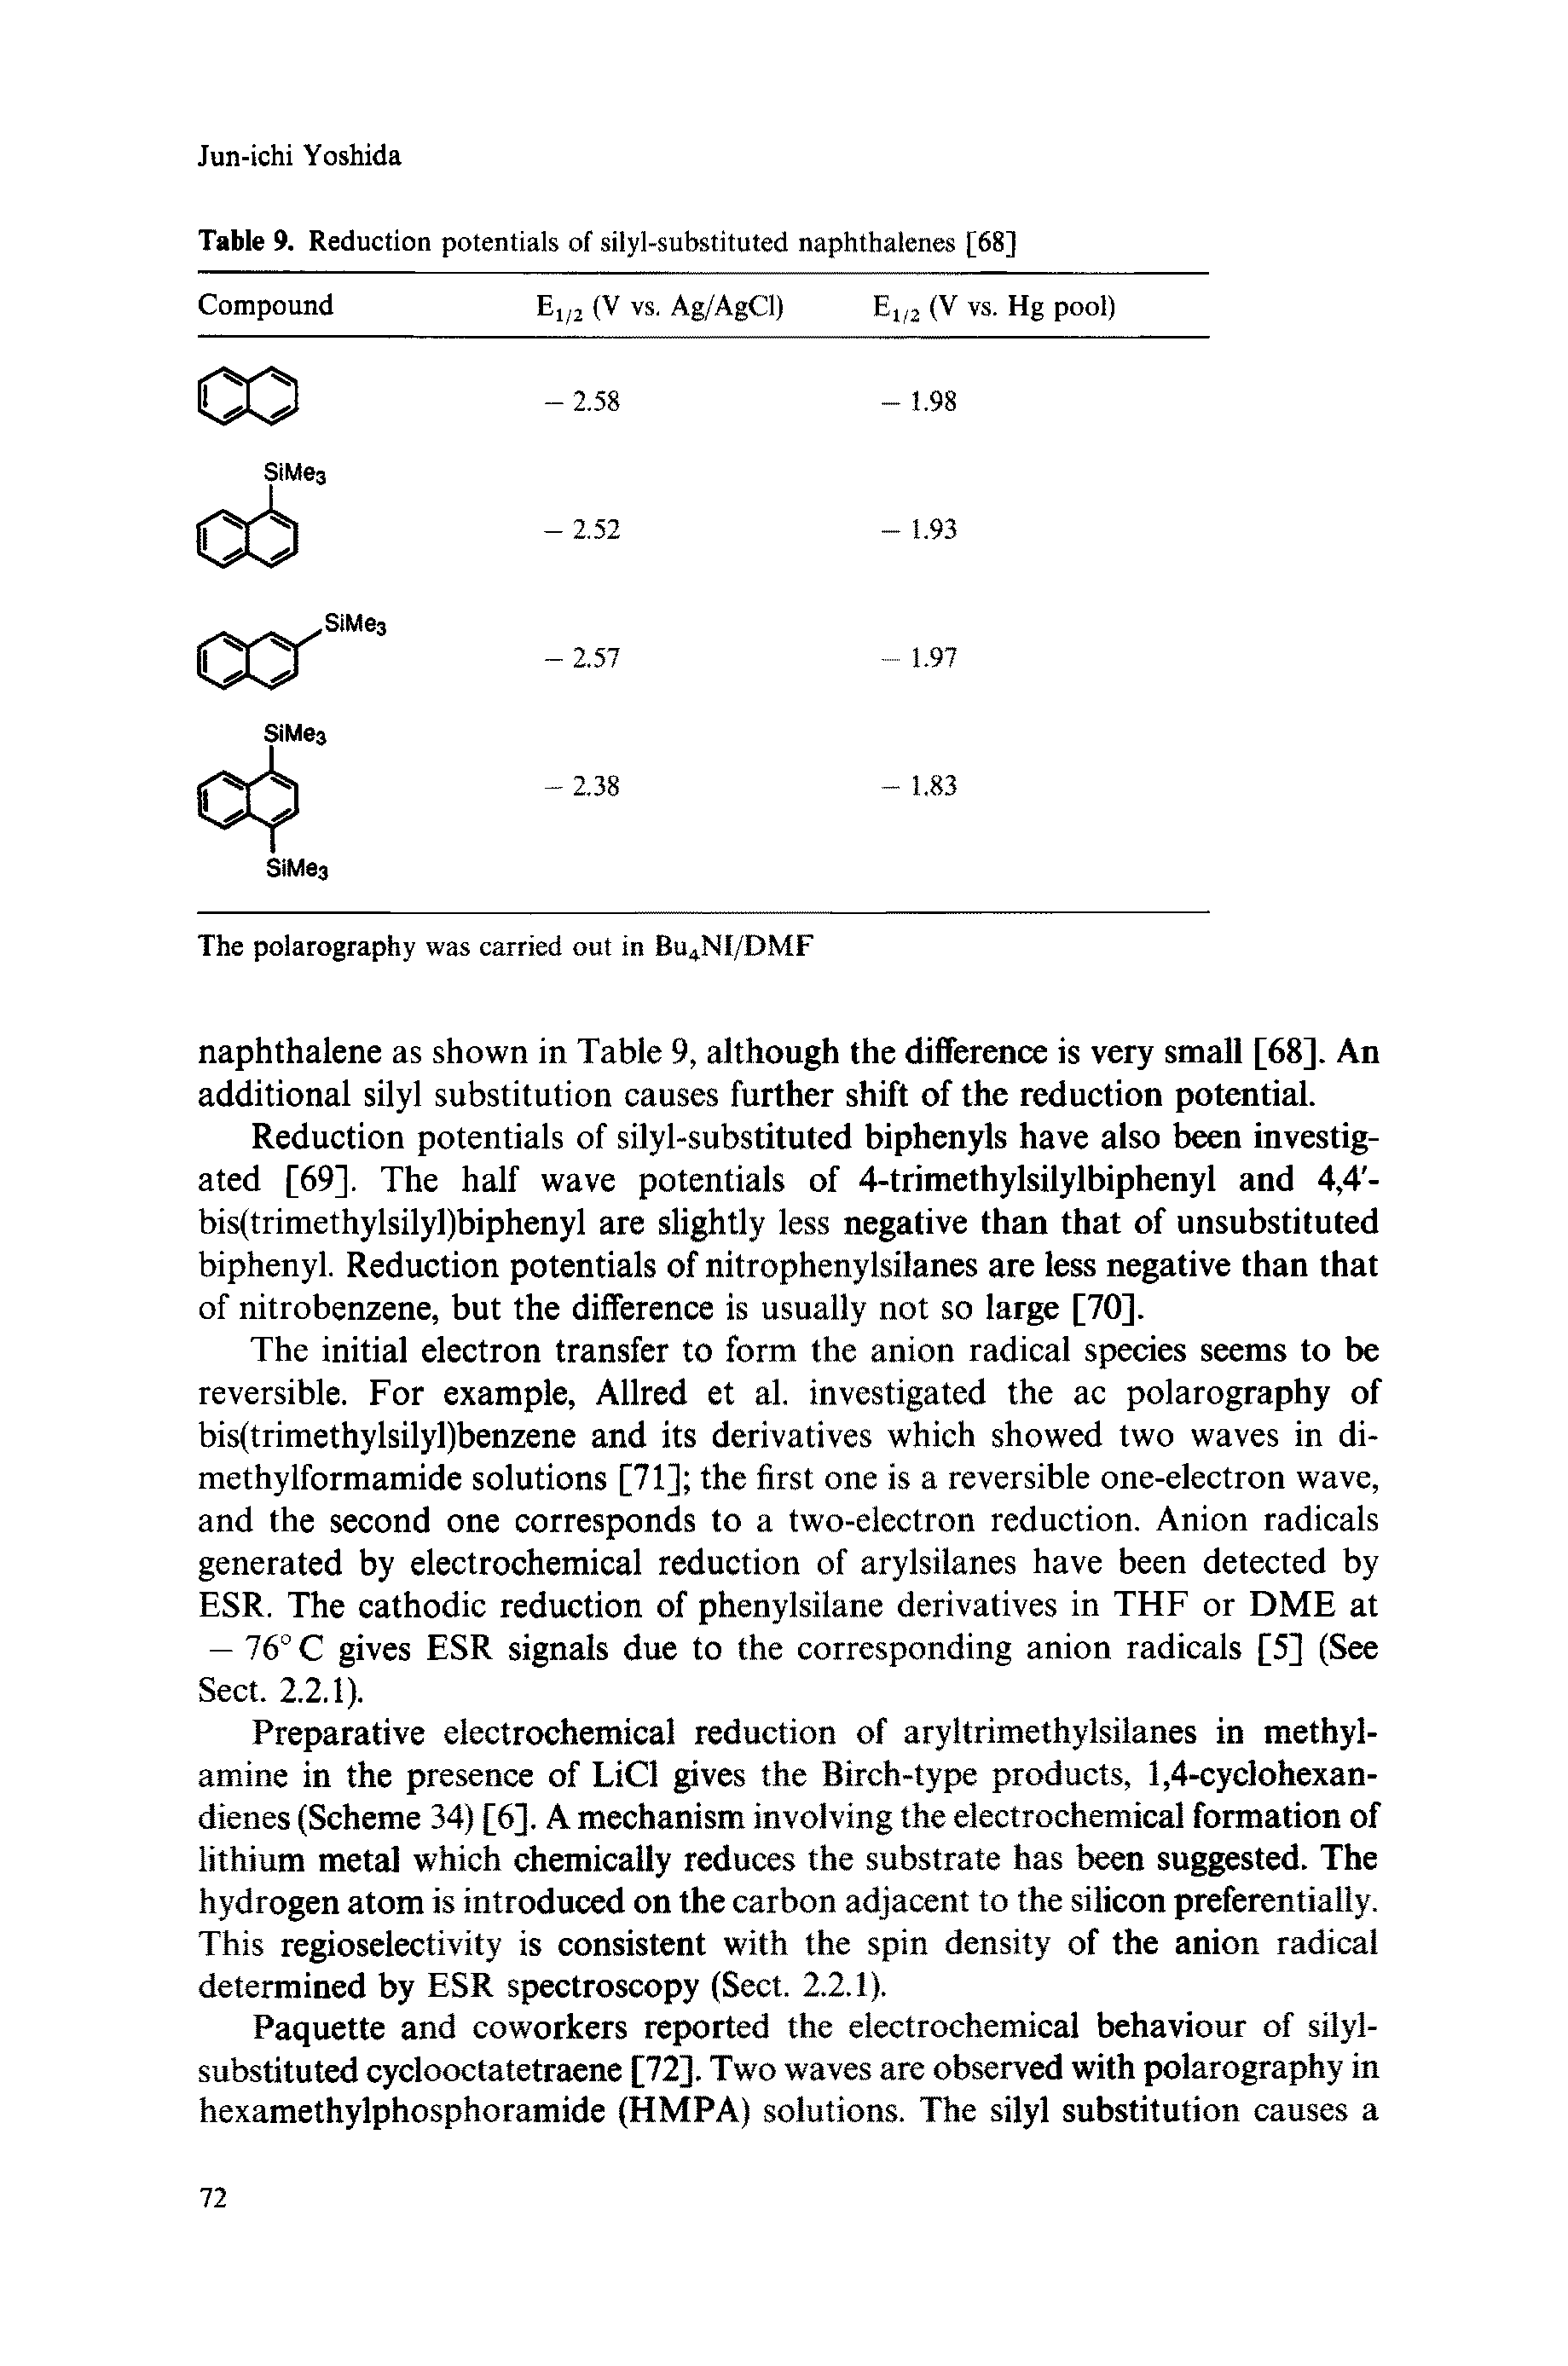 Table 9. Reduction potentials of silyl-substituted naphthalenes [68]...